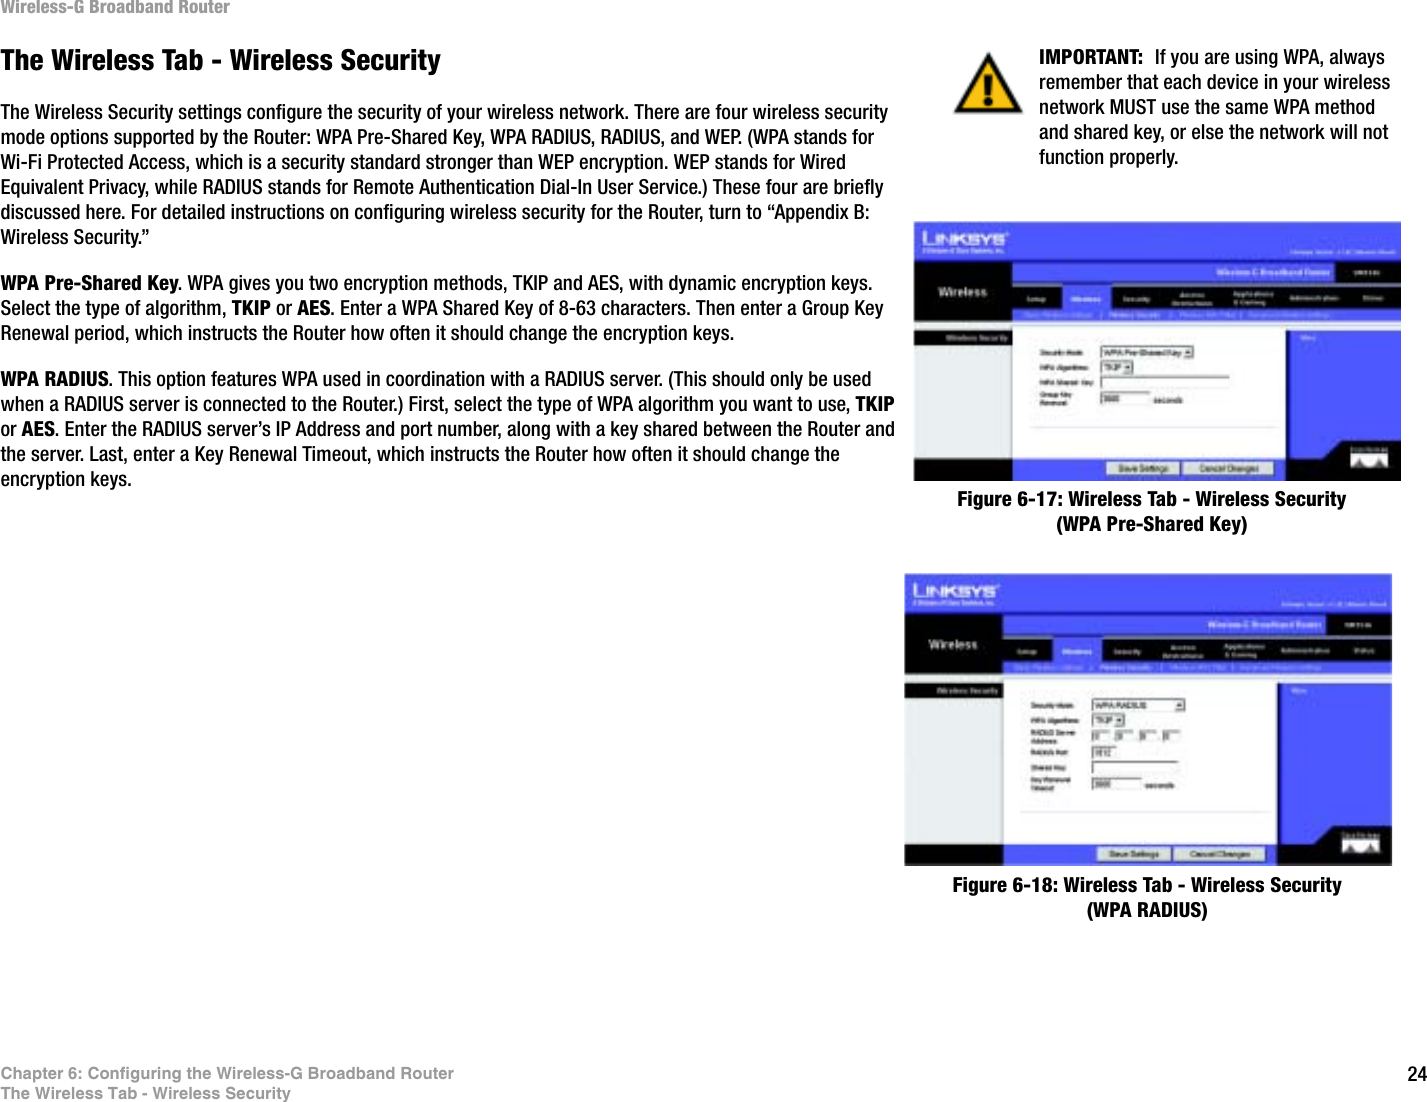 24Chapter 6: Configuring the Wireless-G Broadband RouterThe Wireless Tab - Wireless SecurityWireless-G Broadband RouterThe Wireless Tab - Wireless SecurityThe Wireless Security settings configure the security of your wireless network. There are four wireless security mode options supported by the Router: WPA Pre-Shared Key, WPA RADIUS, RADIUS, and WEP. (WPA stands for Wi-Fi Protected Access, which is a security standard stronger than WEP encryption. WEP stands for Wired Equivalent Privacy, while RADIUS stands for Remote Authentication Dial-In User Service.) These four are briefly discussed here. For detailed instructions on configuring wireless security for the Router, turn to “Appendix B: Wireless Security.”WPA Pre-Shared Key. WPA gives you two encryption methods, TKIP and AES, with dynamic encryption keys. Select the type of algorithm, TKIP or AES. Enter a WPA Shared Key of 8-63 characters. Then enter a Group Key Renewal period, which instructs the Router how often it should change the encryption keys.WPA RADIUS. This option features WPA used in coordination with a RADIUS server. (This should only be used when a RADIUS server is connected to the Router.) First, select the type of WPA algorithm you want to use, TKIPor AES. Enter the RADIUS server’s IP Address and port number, along with a key shared between the Router and the server. Last, enter a Key Renewal Timeout, which instructs the Router how often it should change the encryption keys.Figure 6-17: Wireless Tab - Wireless Security (WPA Pre-Shared Key)Figure 6-18: Wireless Tab - Wireless Security (WPA RADIUS)IMPORTANT:  If you are using WPA, always remember that each device in your wireless network MUST use the same WPA method and shared key, or else the network will not function properly.